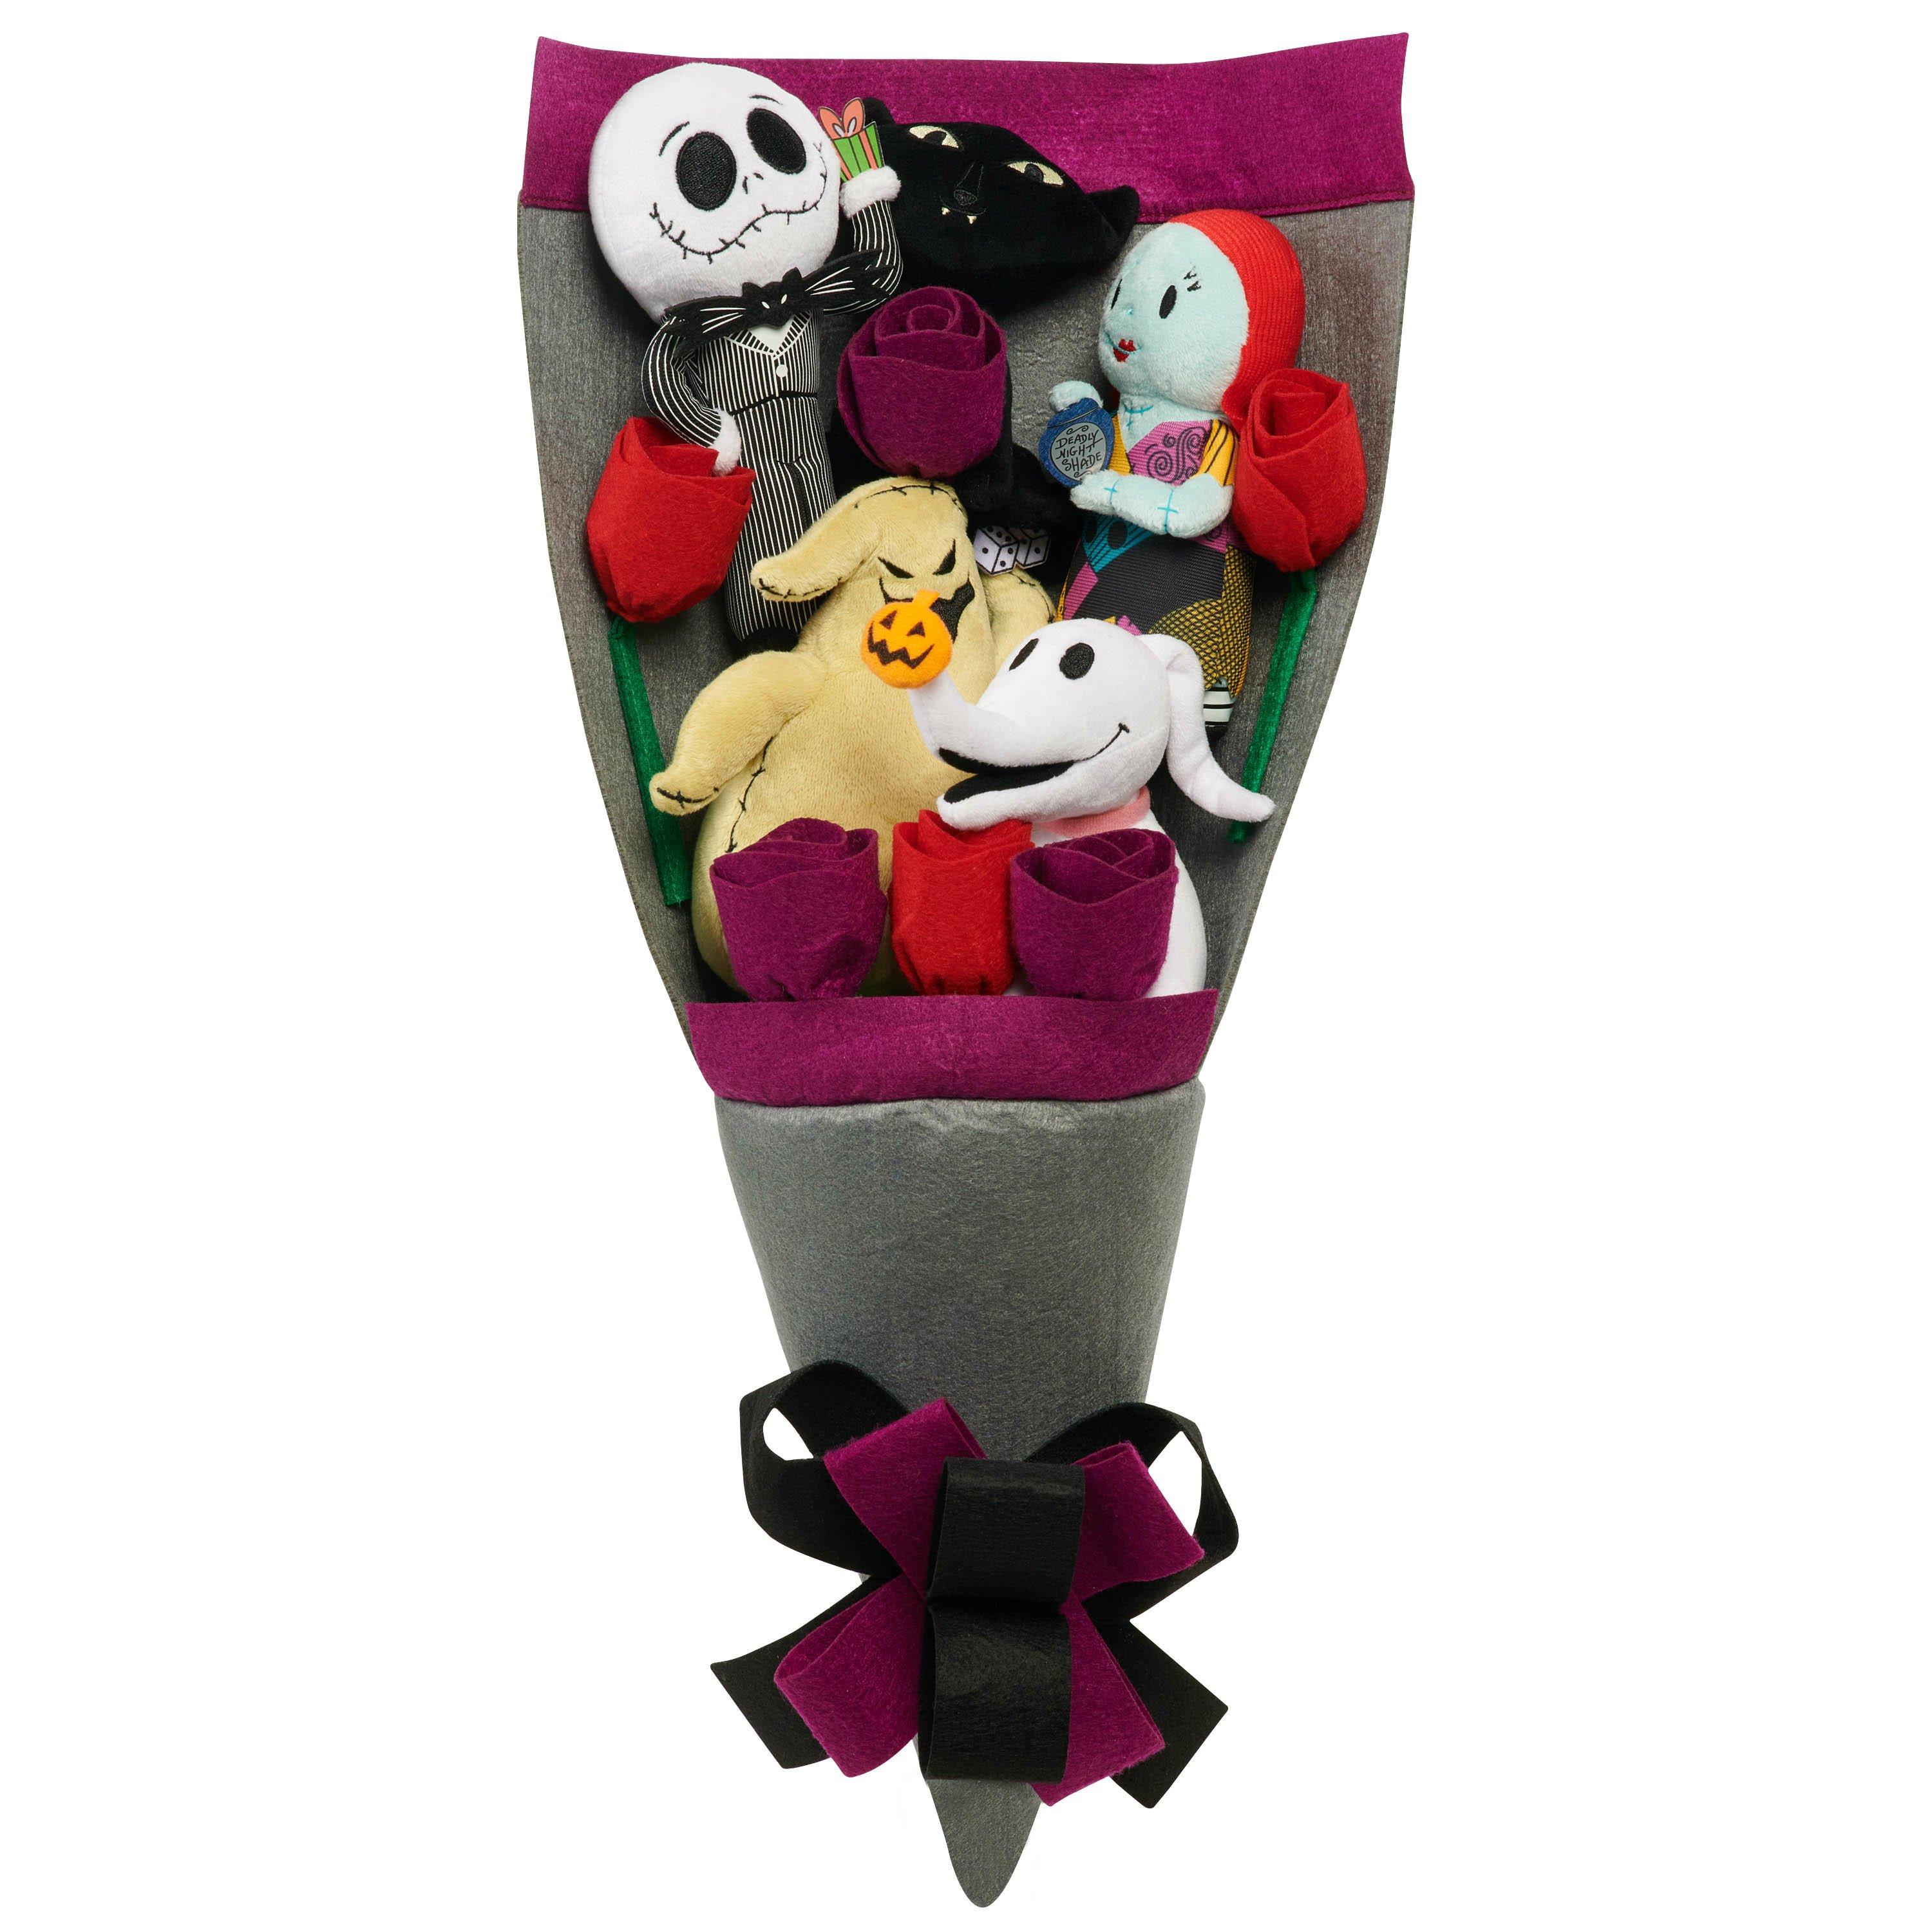 list item 1 of 10 Just Play Nightmare Before Christmas Plush Bouquet GameStop Exclusive